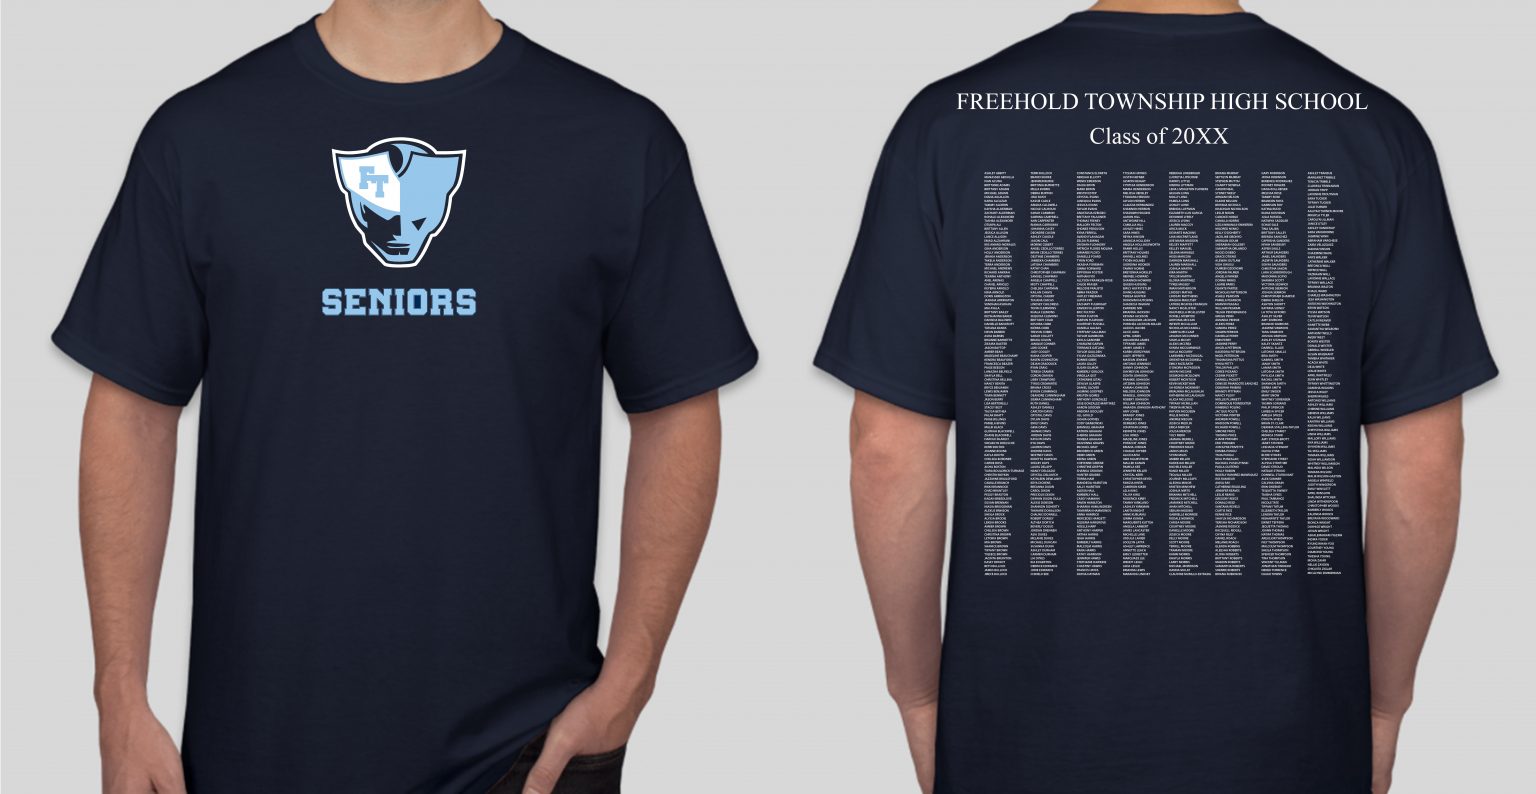 freehold township high school sports